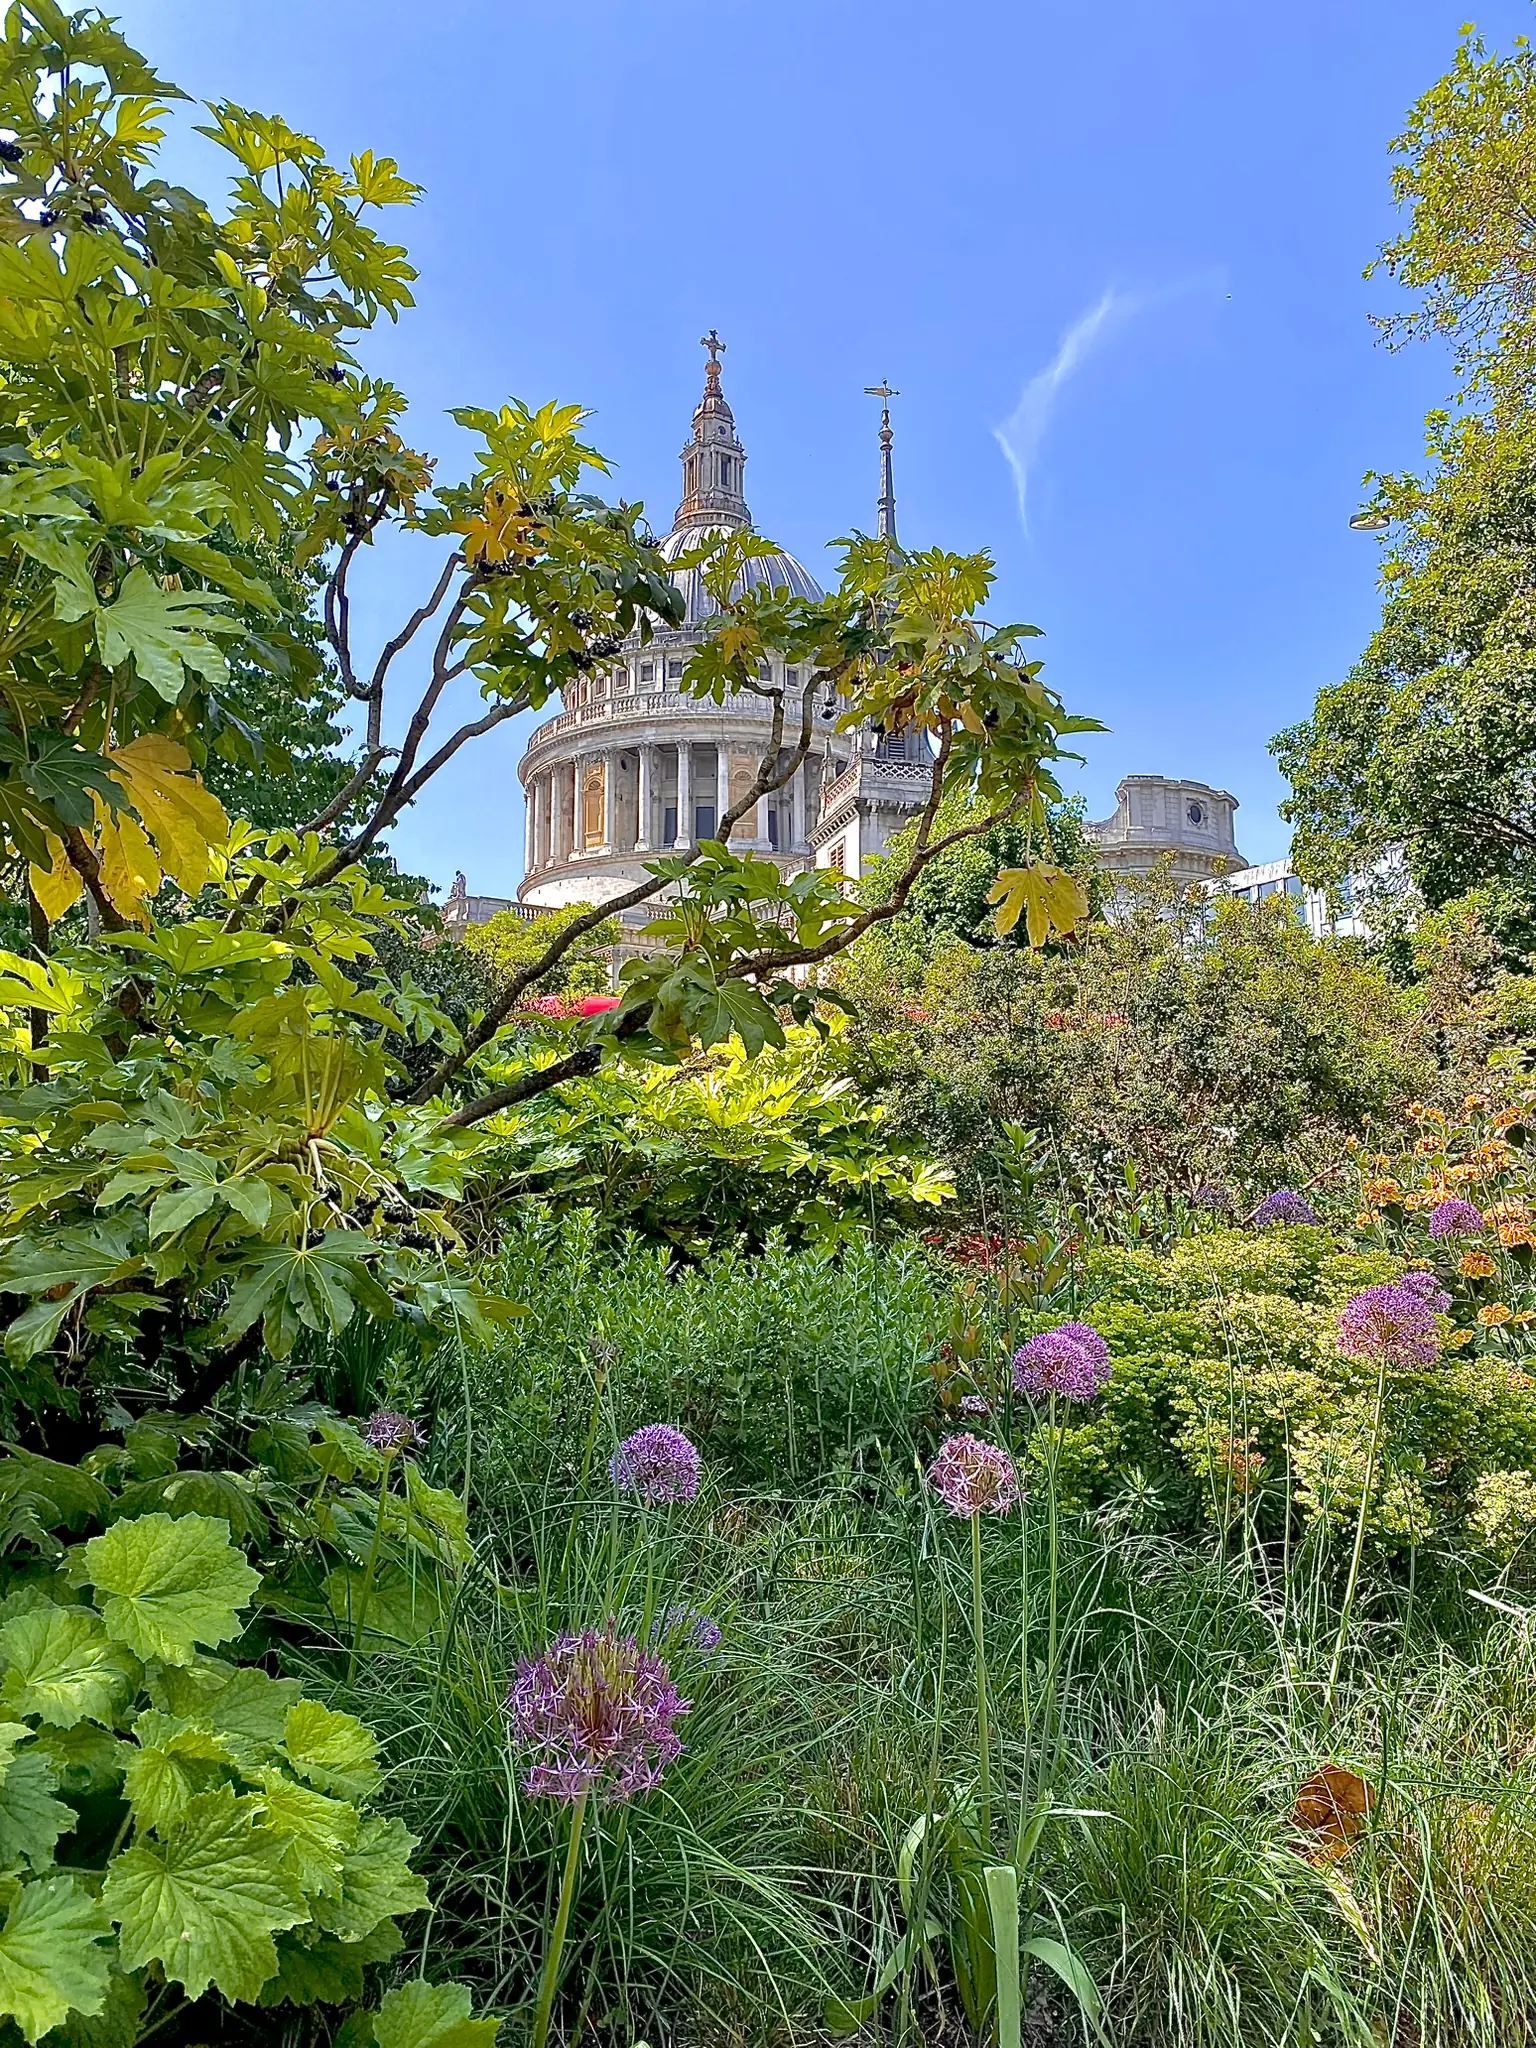 St. Paul's cathedral in the background, garden flowers in the foreground.